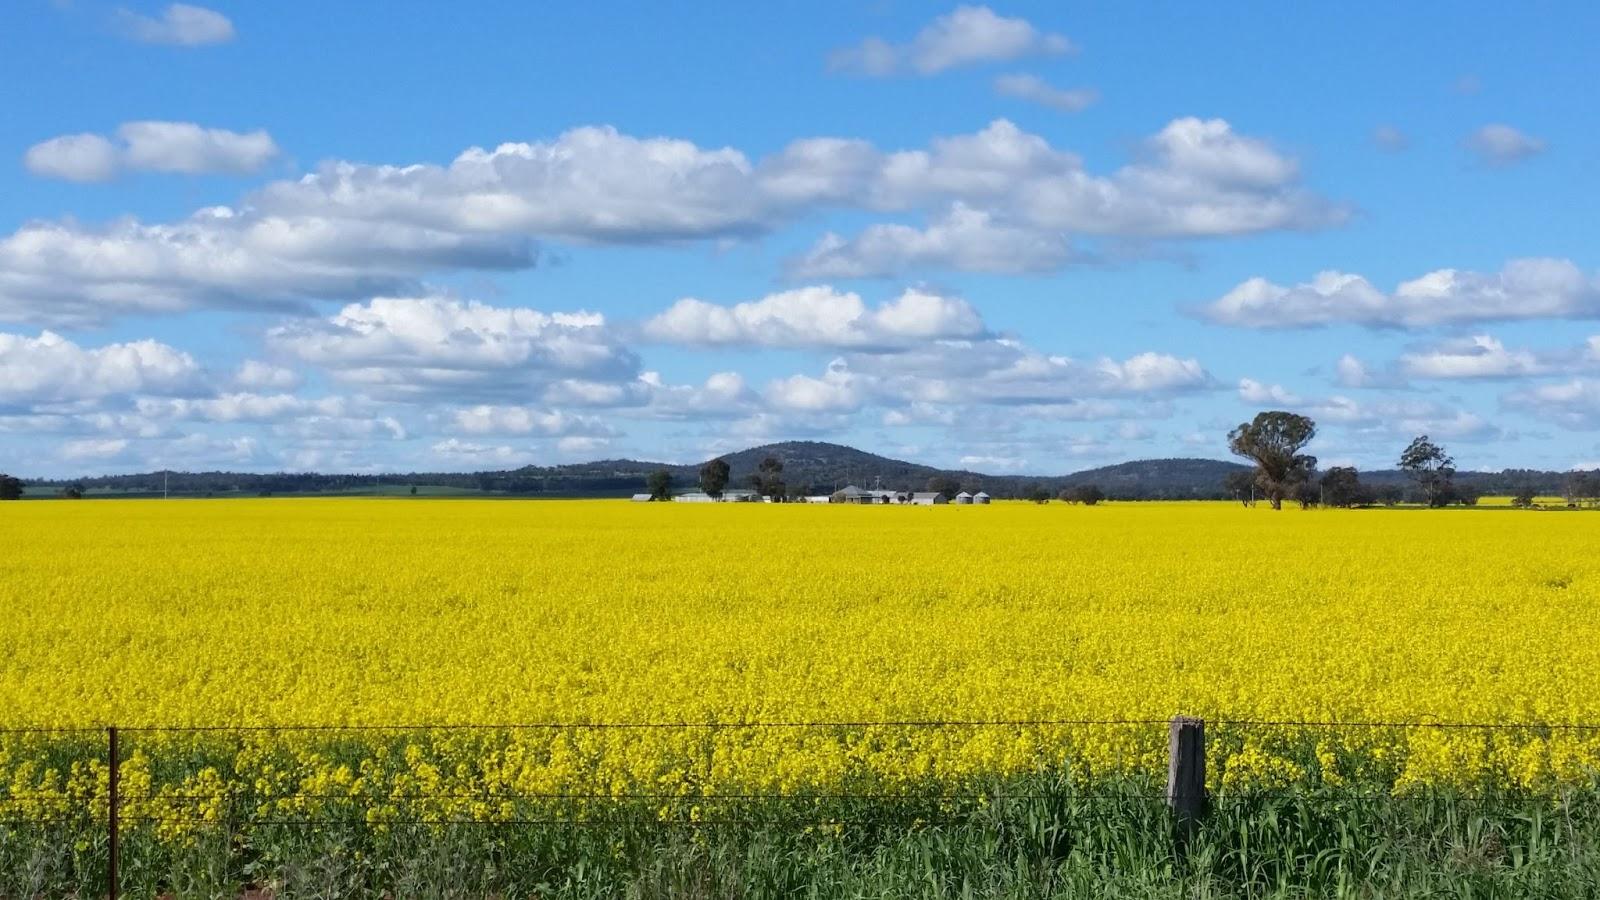 Canola fields in West Wyalong, a town in Bland Shire New South Wales